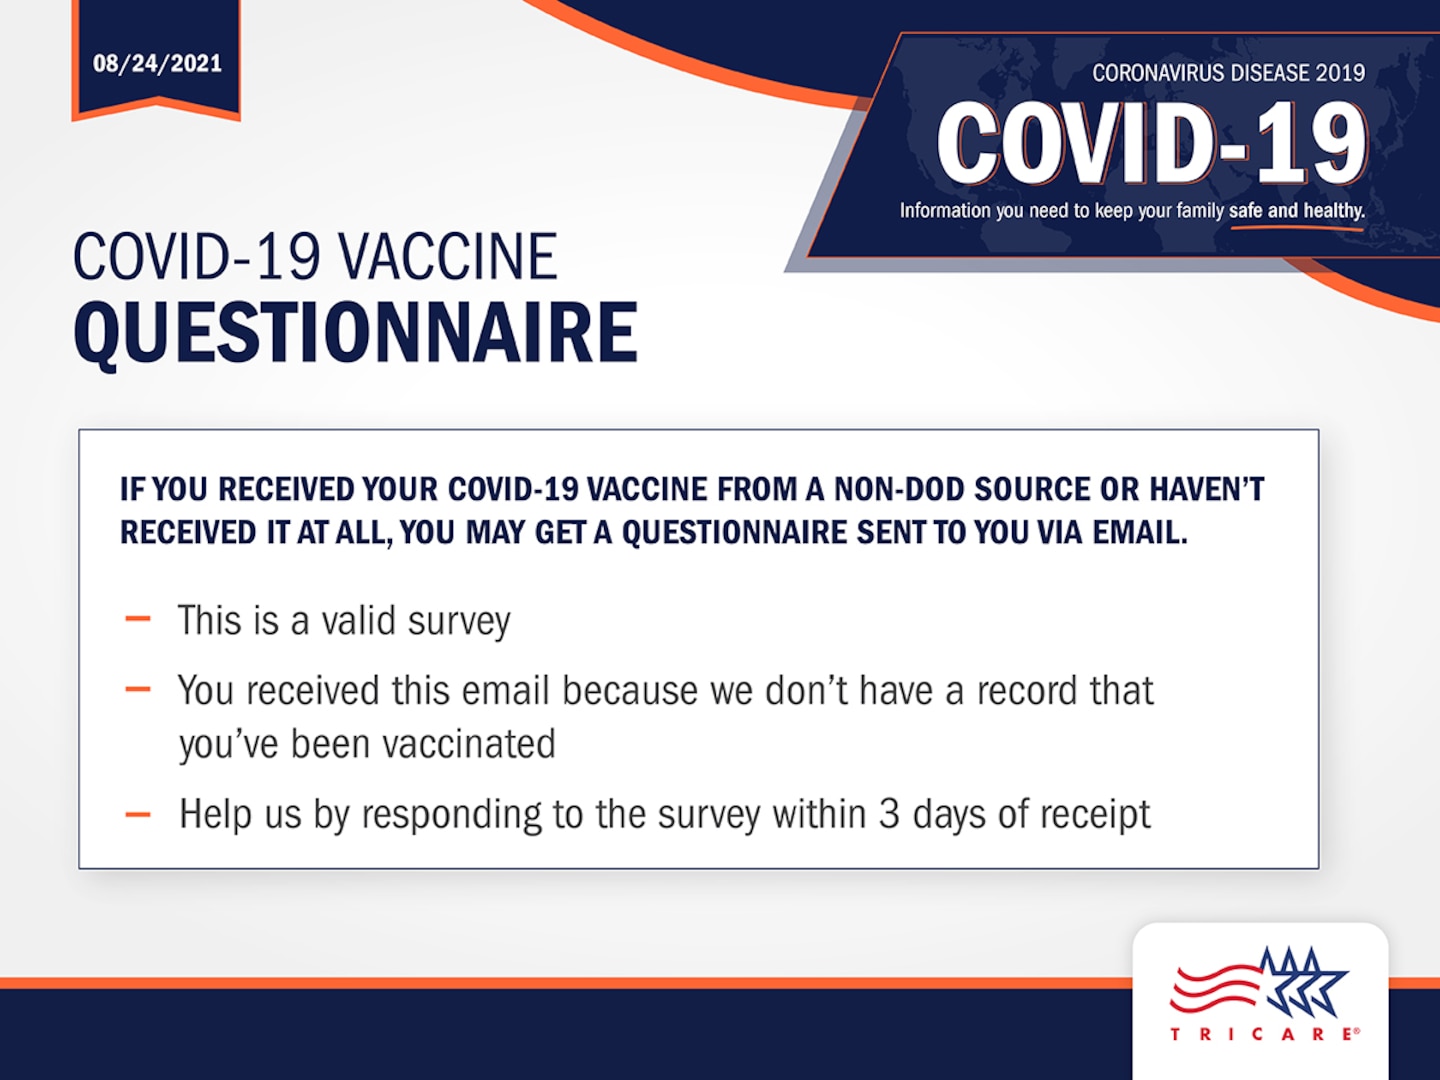 Did you get an email asking you to take a #COVIDVaccine Questionnaire? Please take a few moments to complete it! Feel confident knowing that it’s a safe and valid questionnaire from the #DOD.